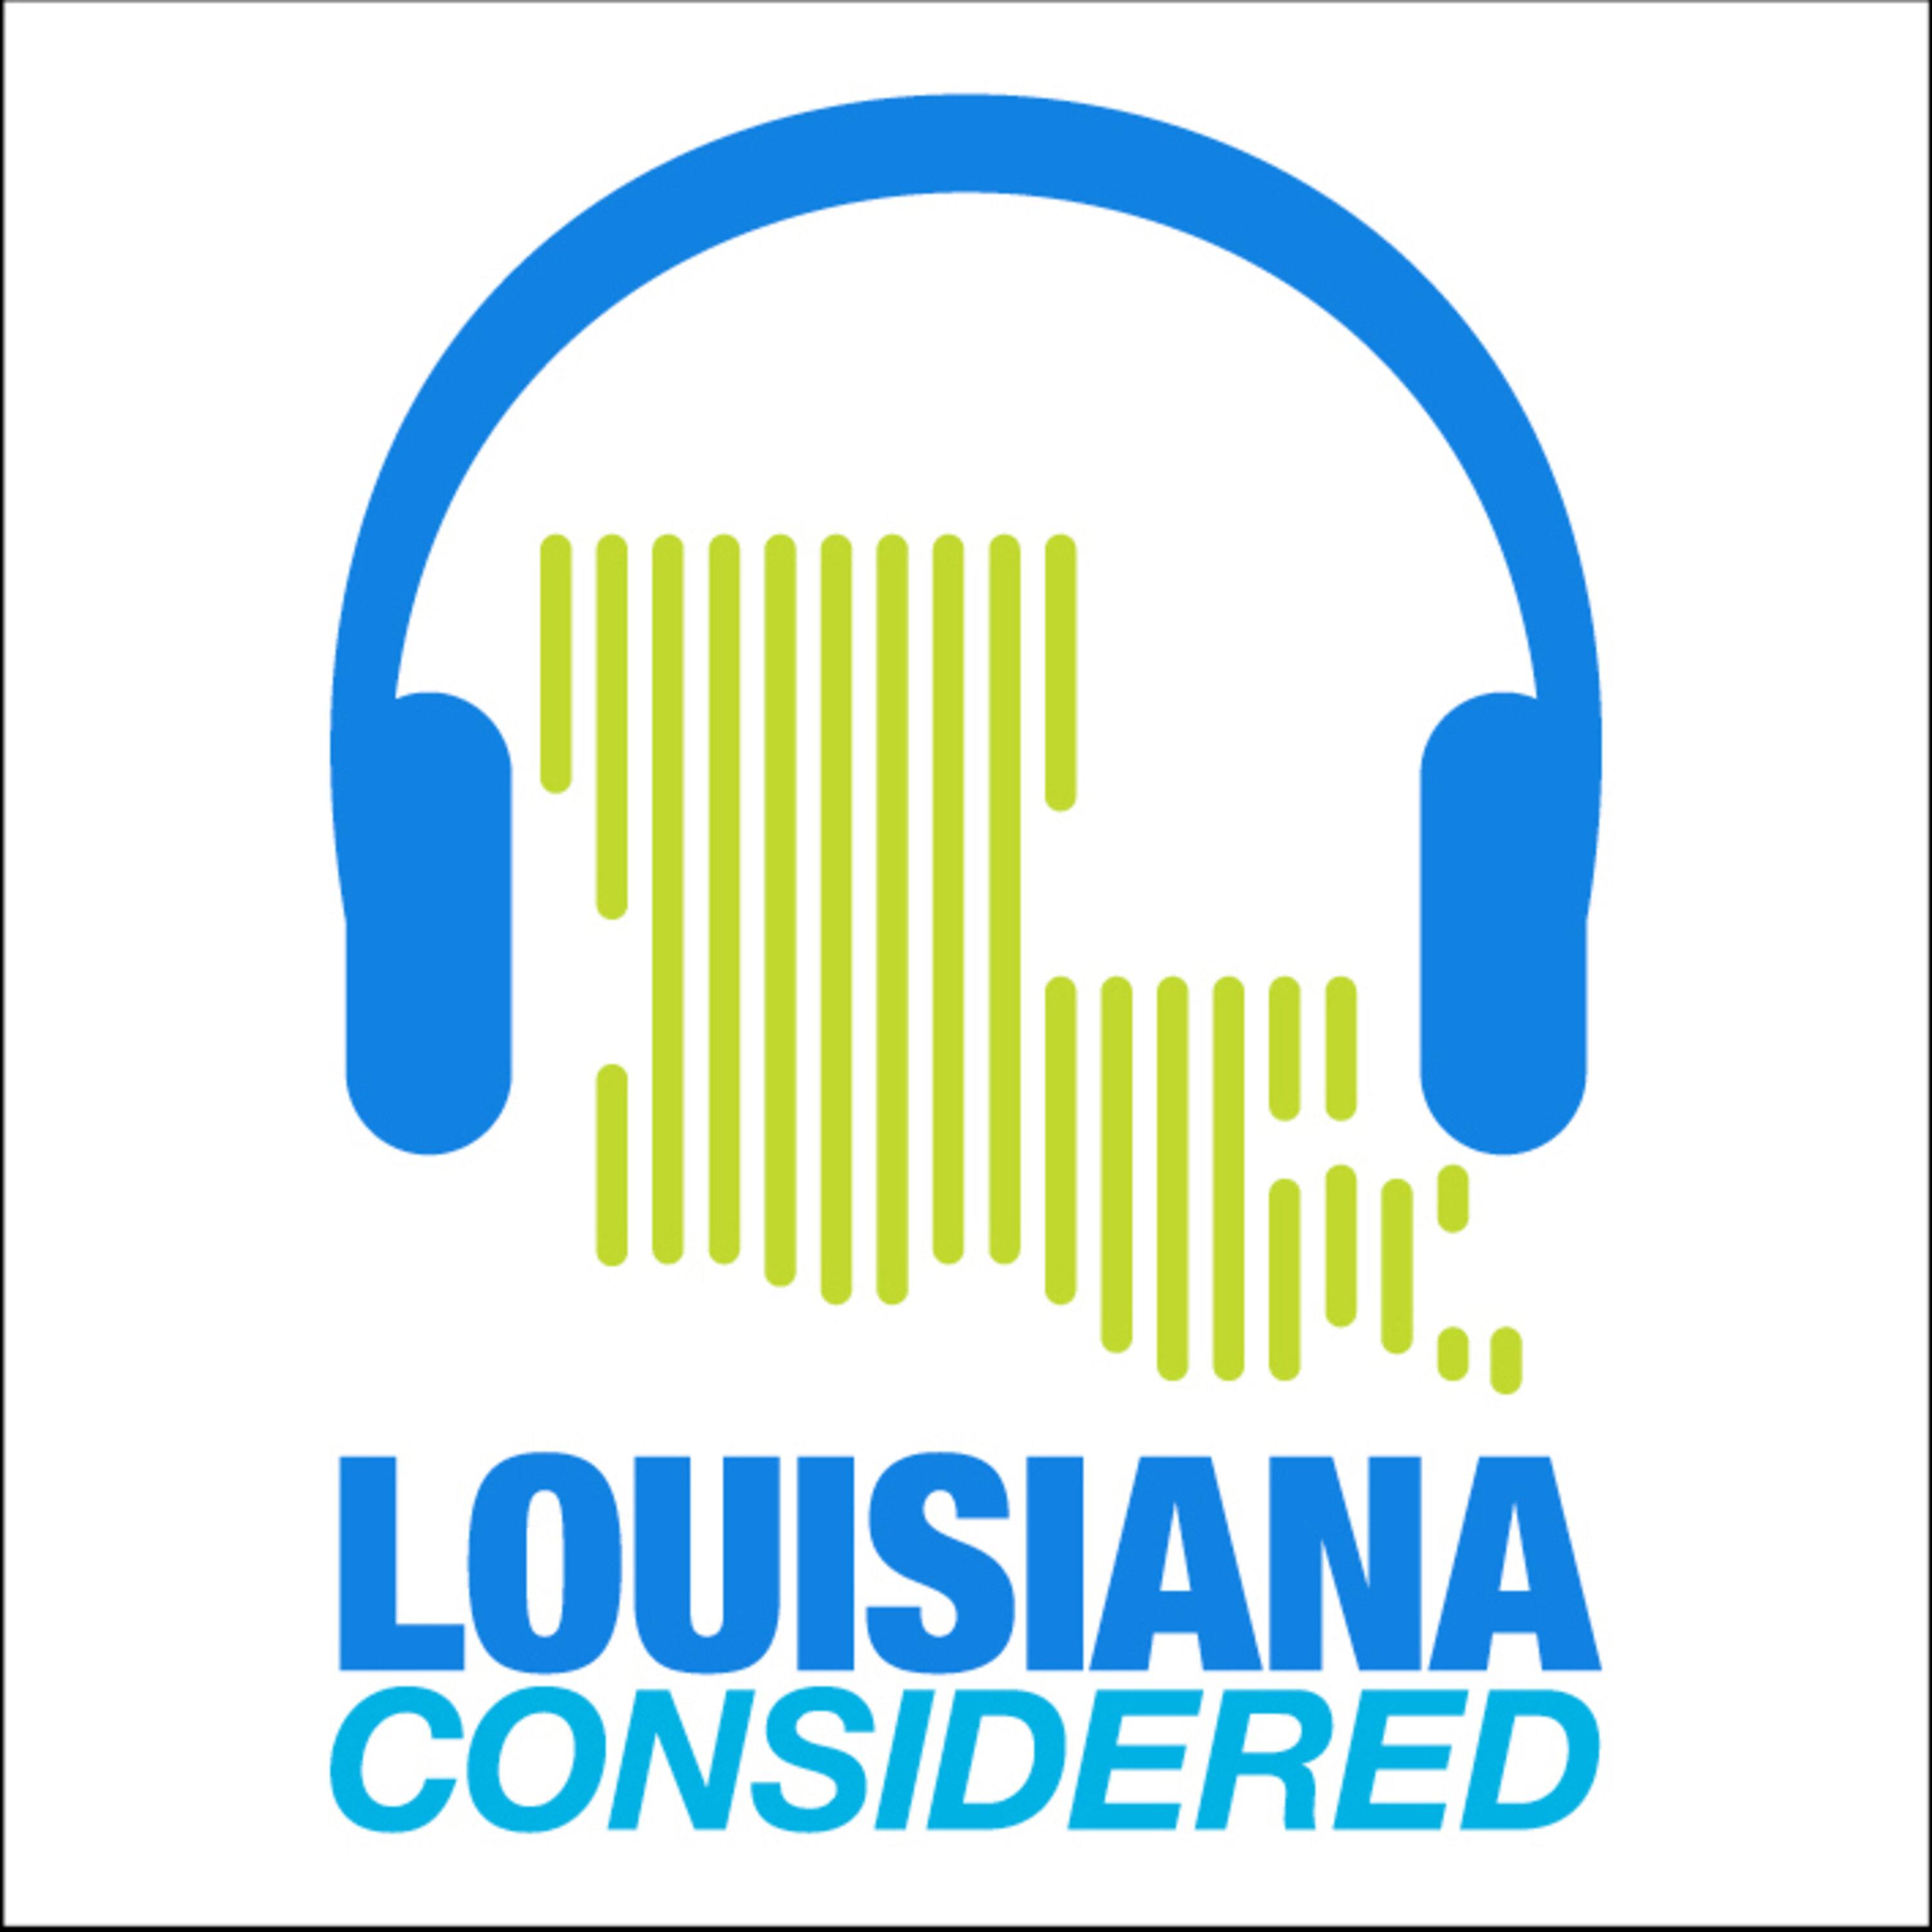 Thumbnail for "Louisiana Considered: Chronicling the climate crisis with Elizabeth Rush".